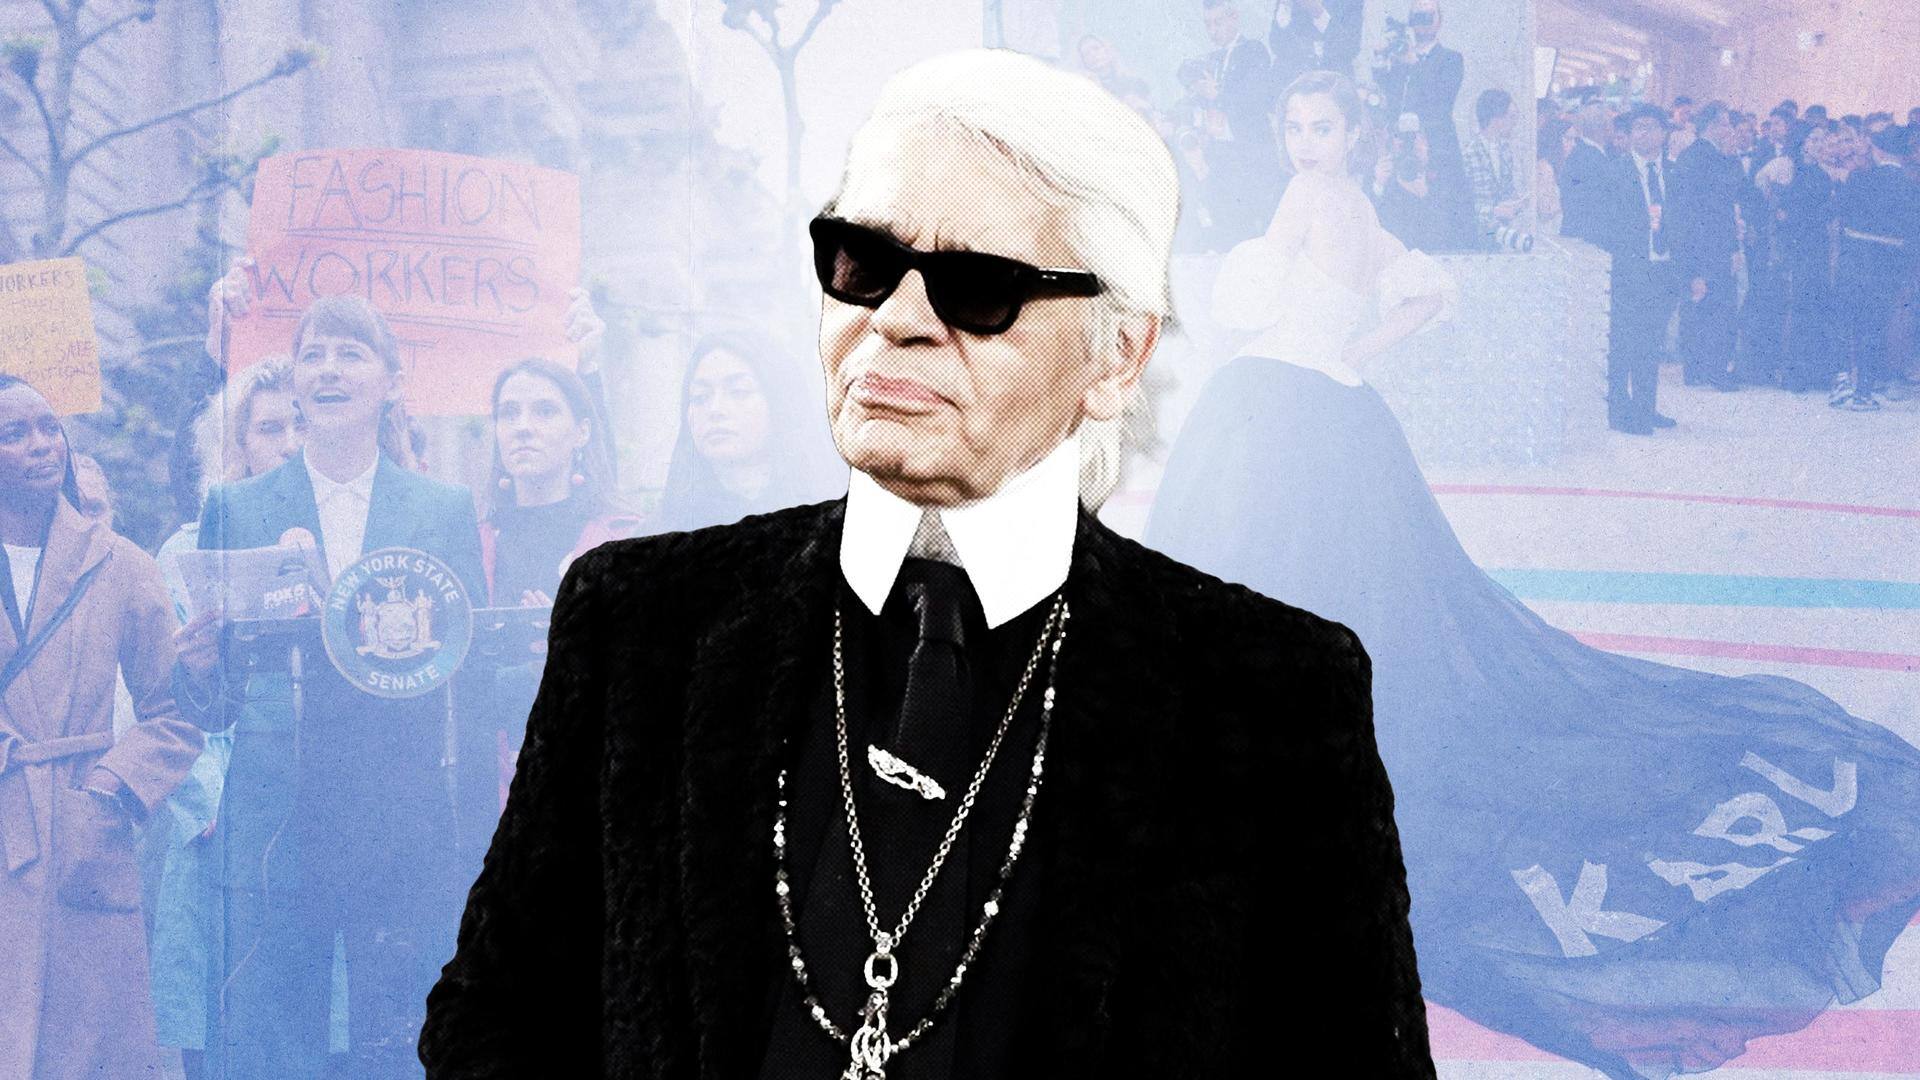 Met Gala: Why models are protesting against Karl Lagerfeld theme